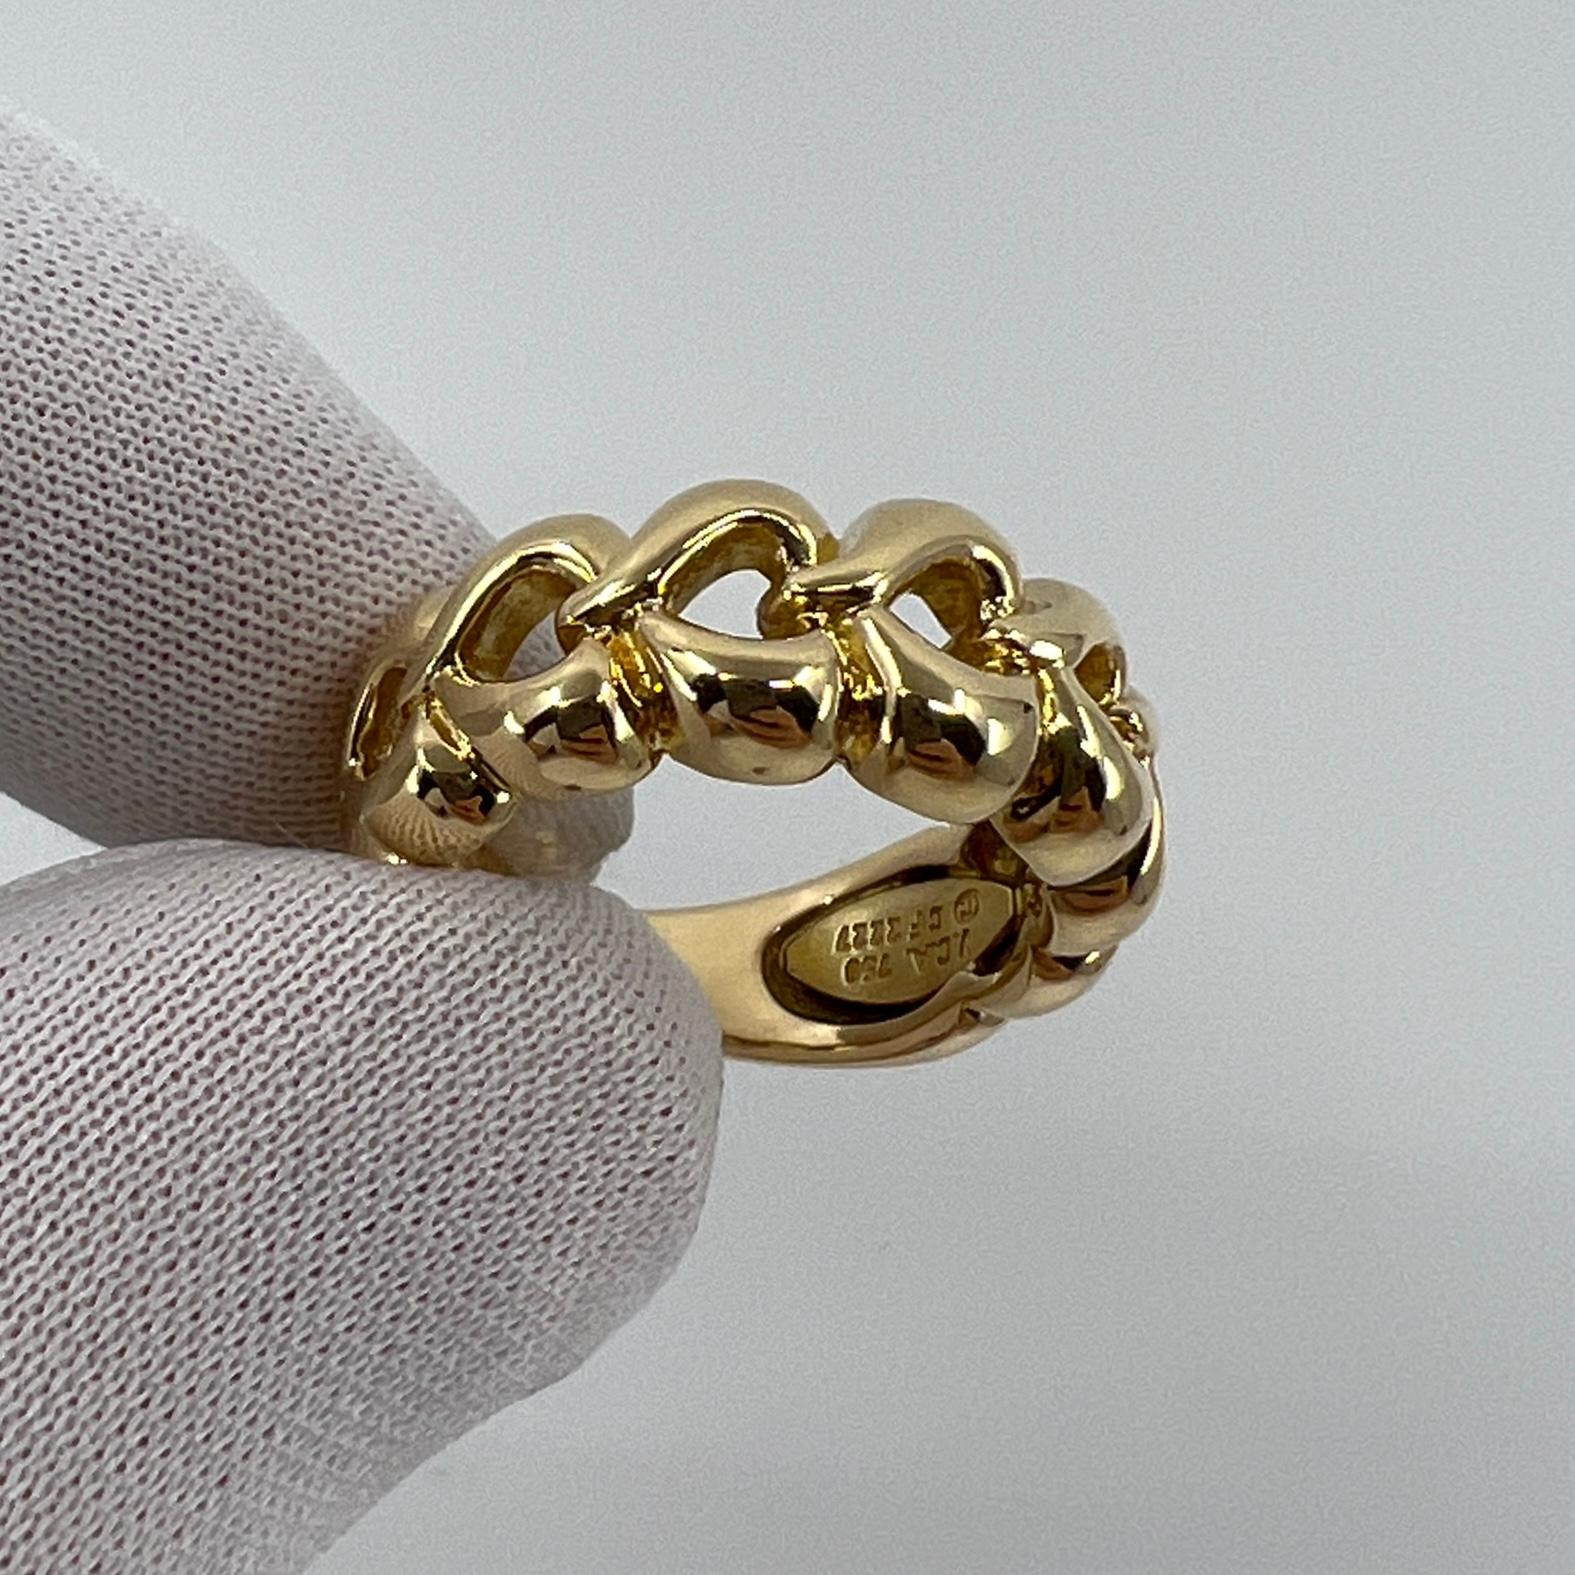 Rare Vintage Van Cleef & Arpels 18k Yellow Gold Open Heart Band Ring with Box For Sale 6